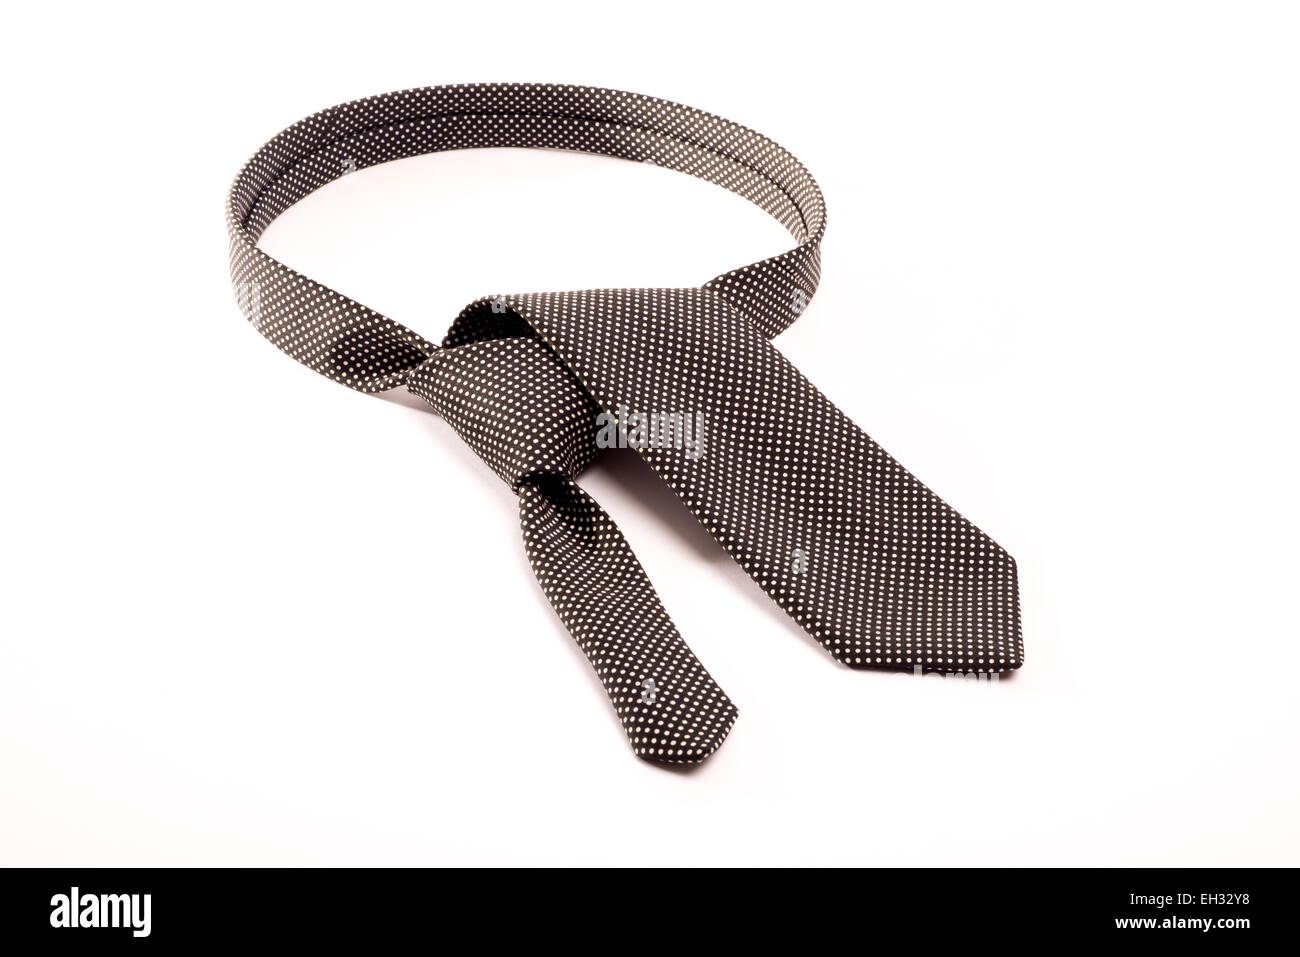 A black tie with white dots on a white background folded as if to make a tie knot around the neck. Stock Photo